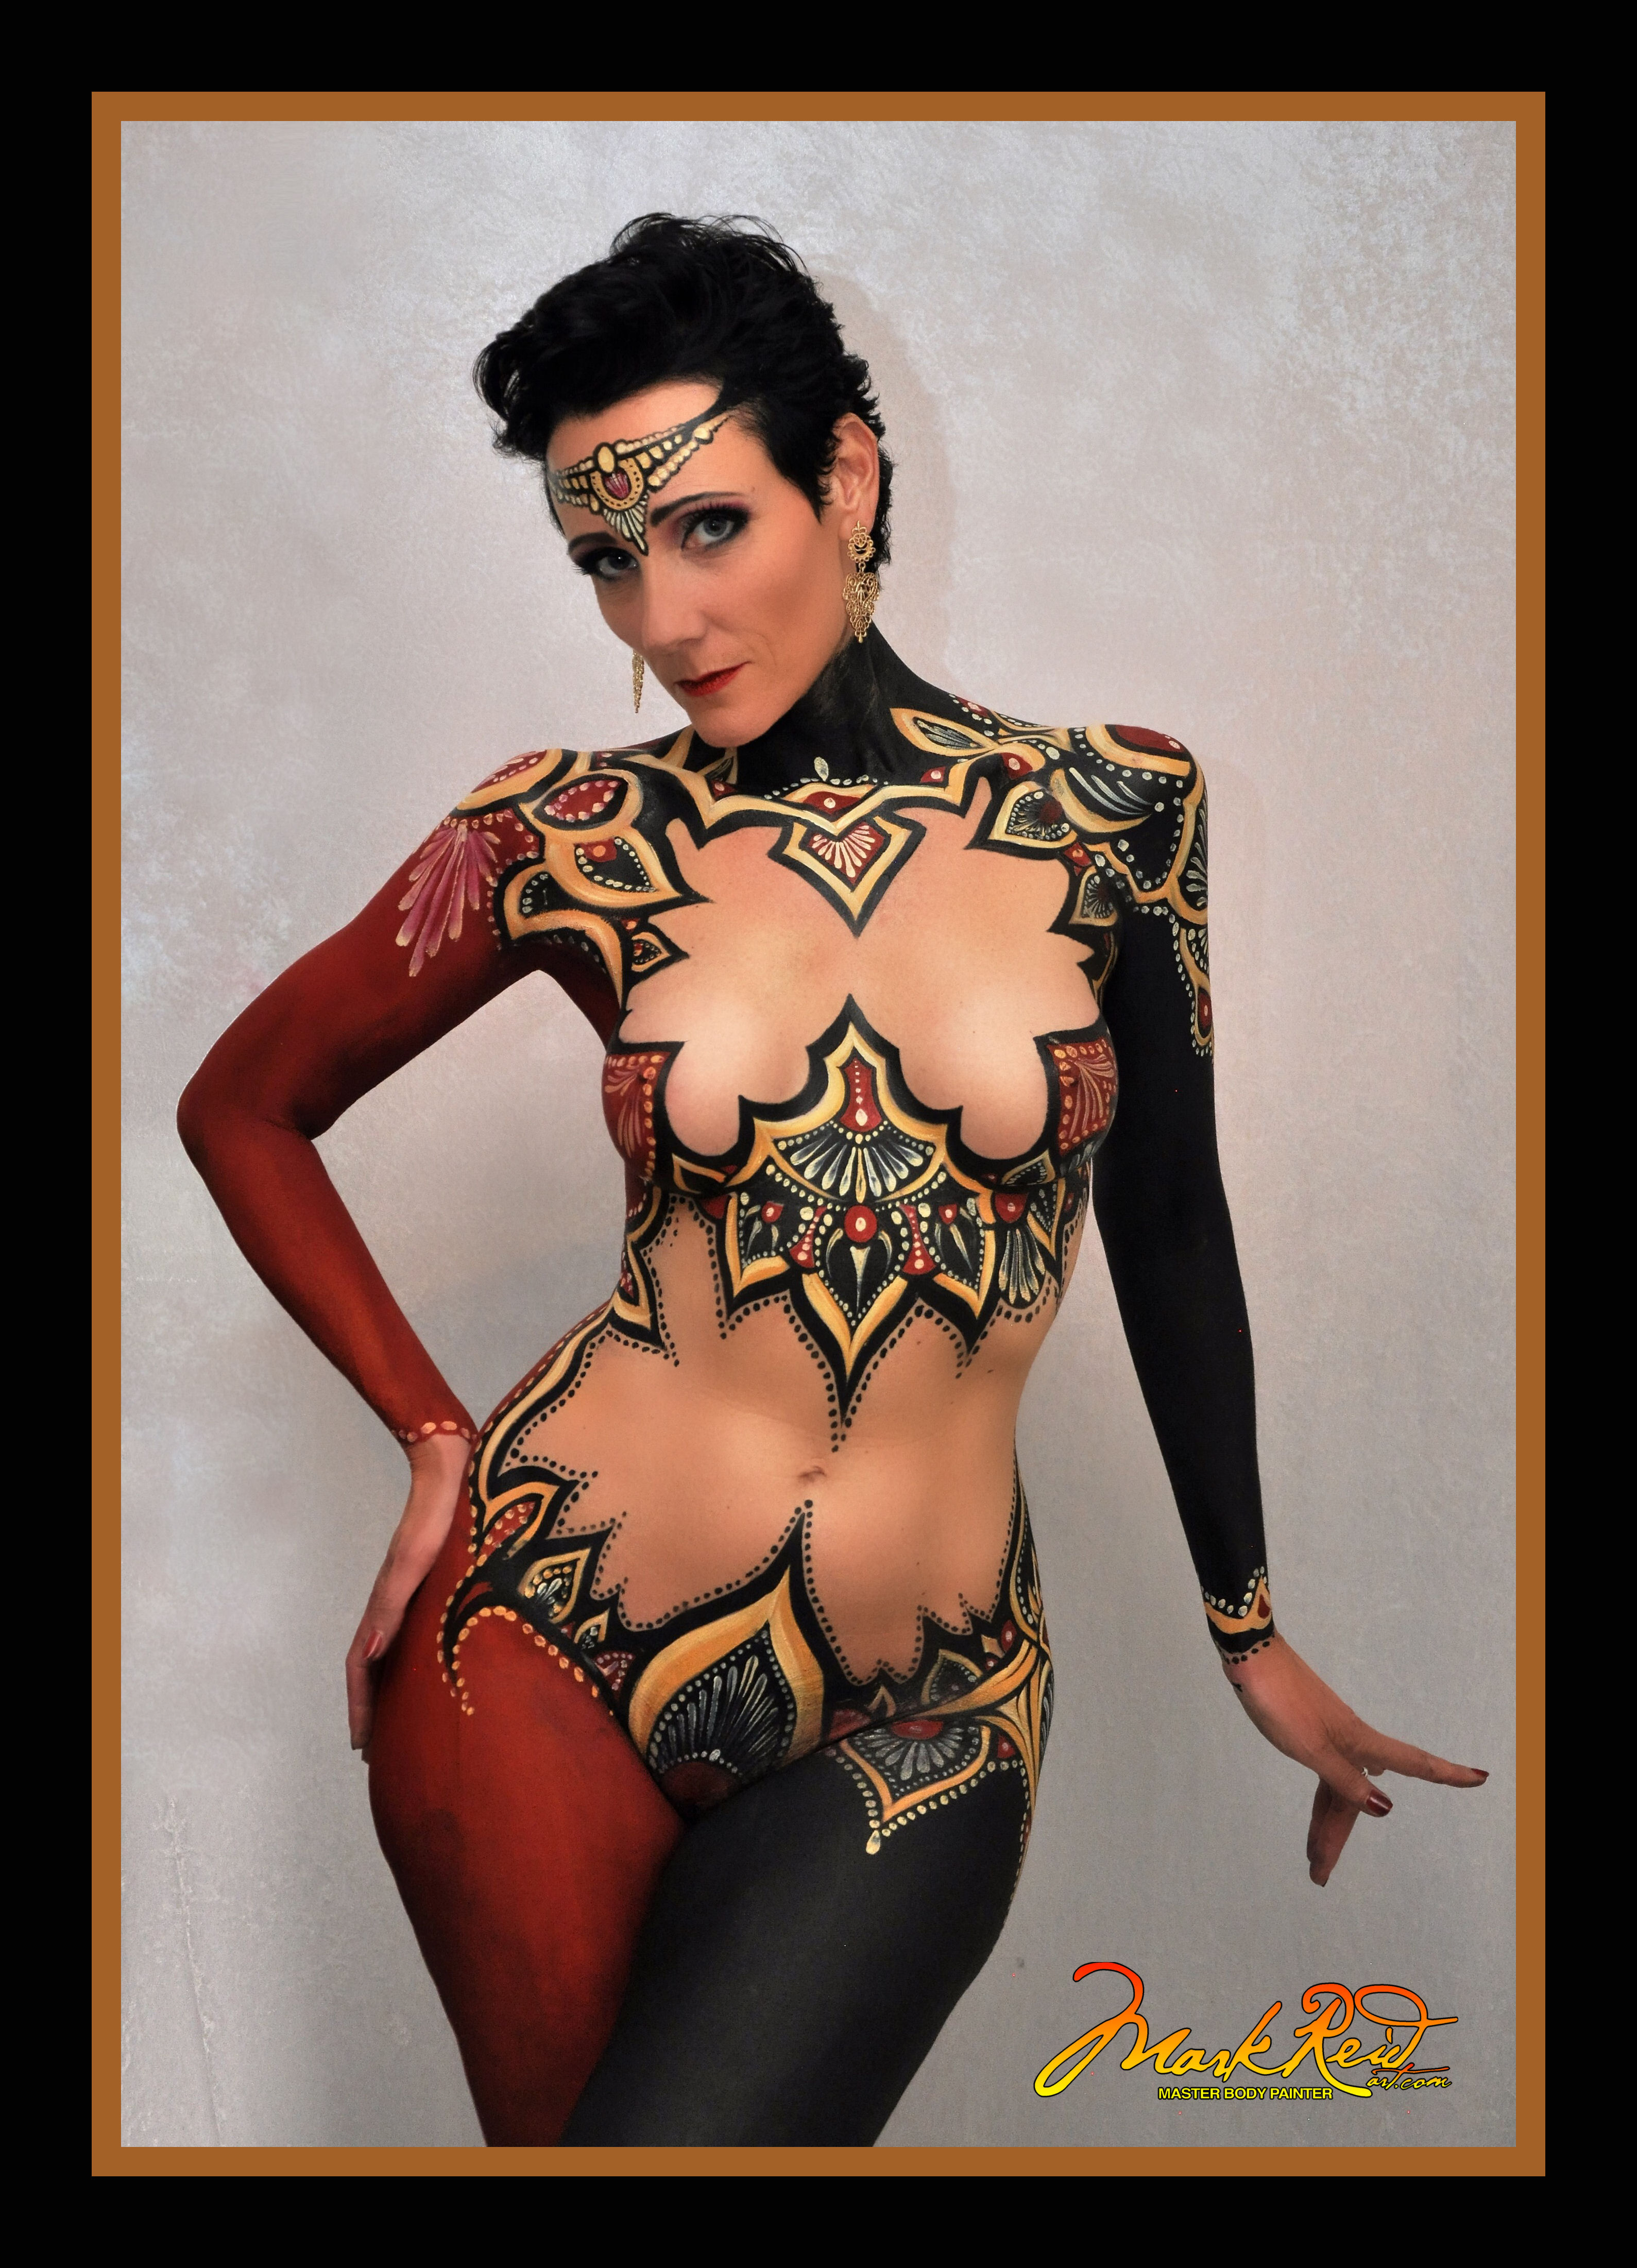 Beautiful short black haired woman with an extremely detailed full body painting in red black and gold